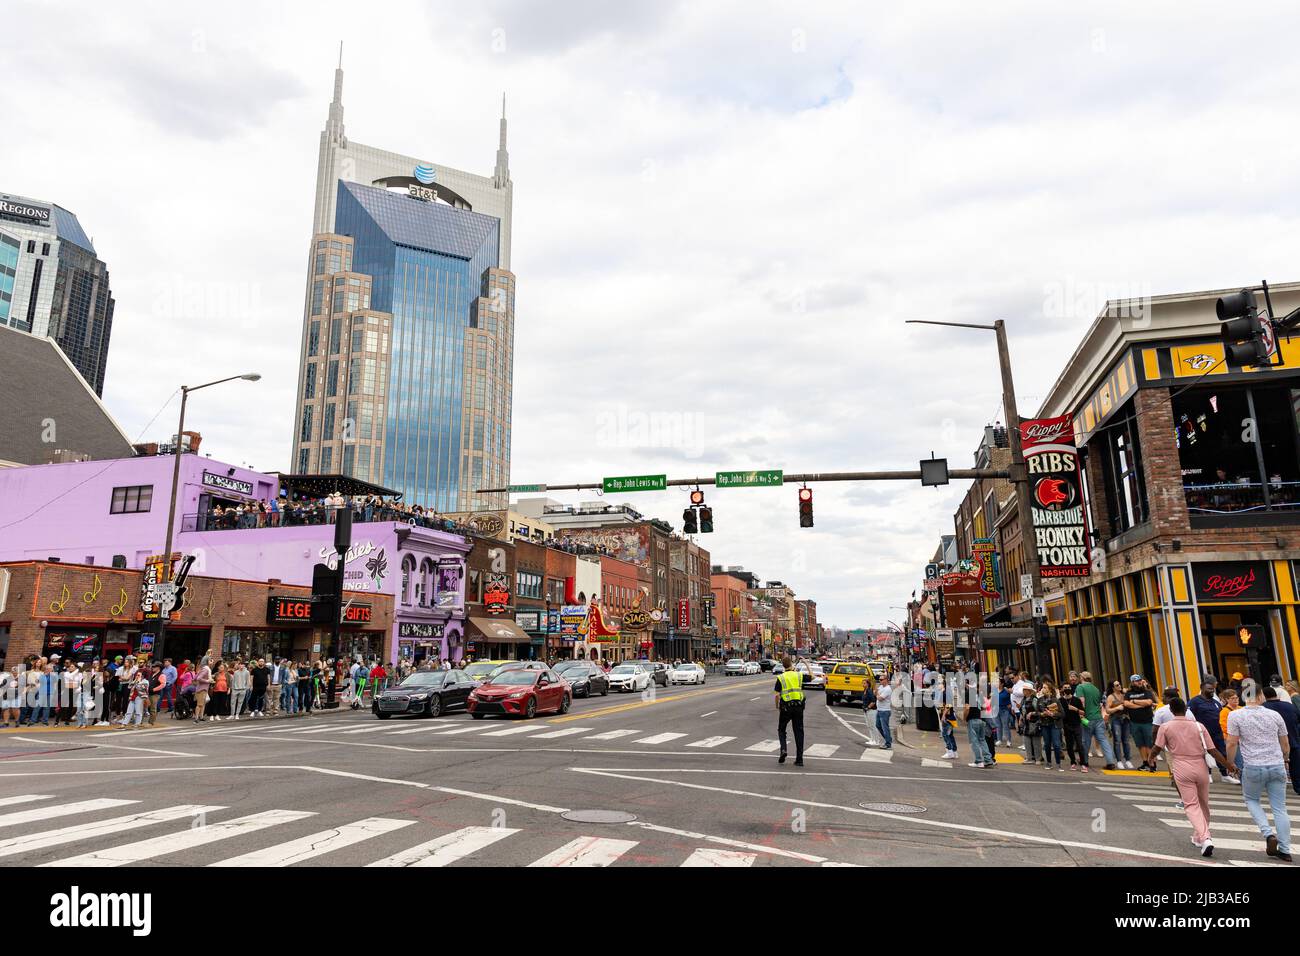 Nashville, TN - March 5, 2022: Famous Broadway in Nashville, TN, with the AT&T building in the background. Stock Photo